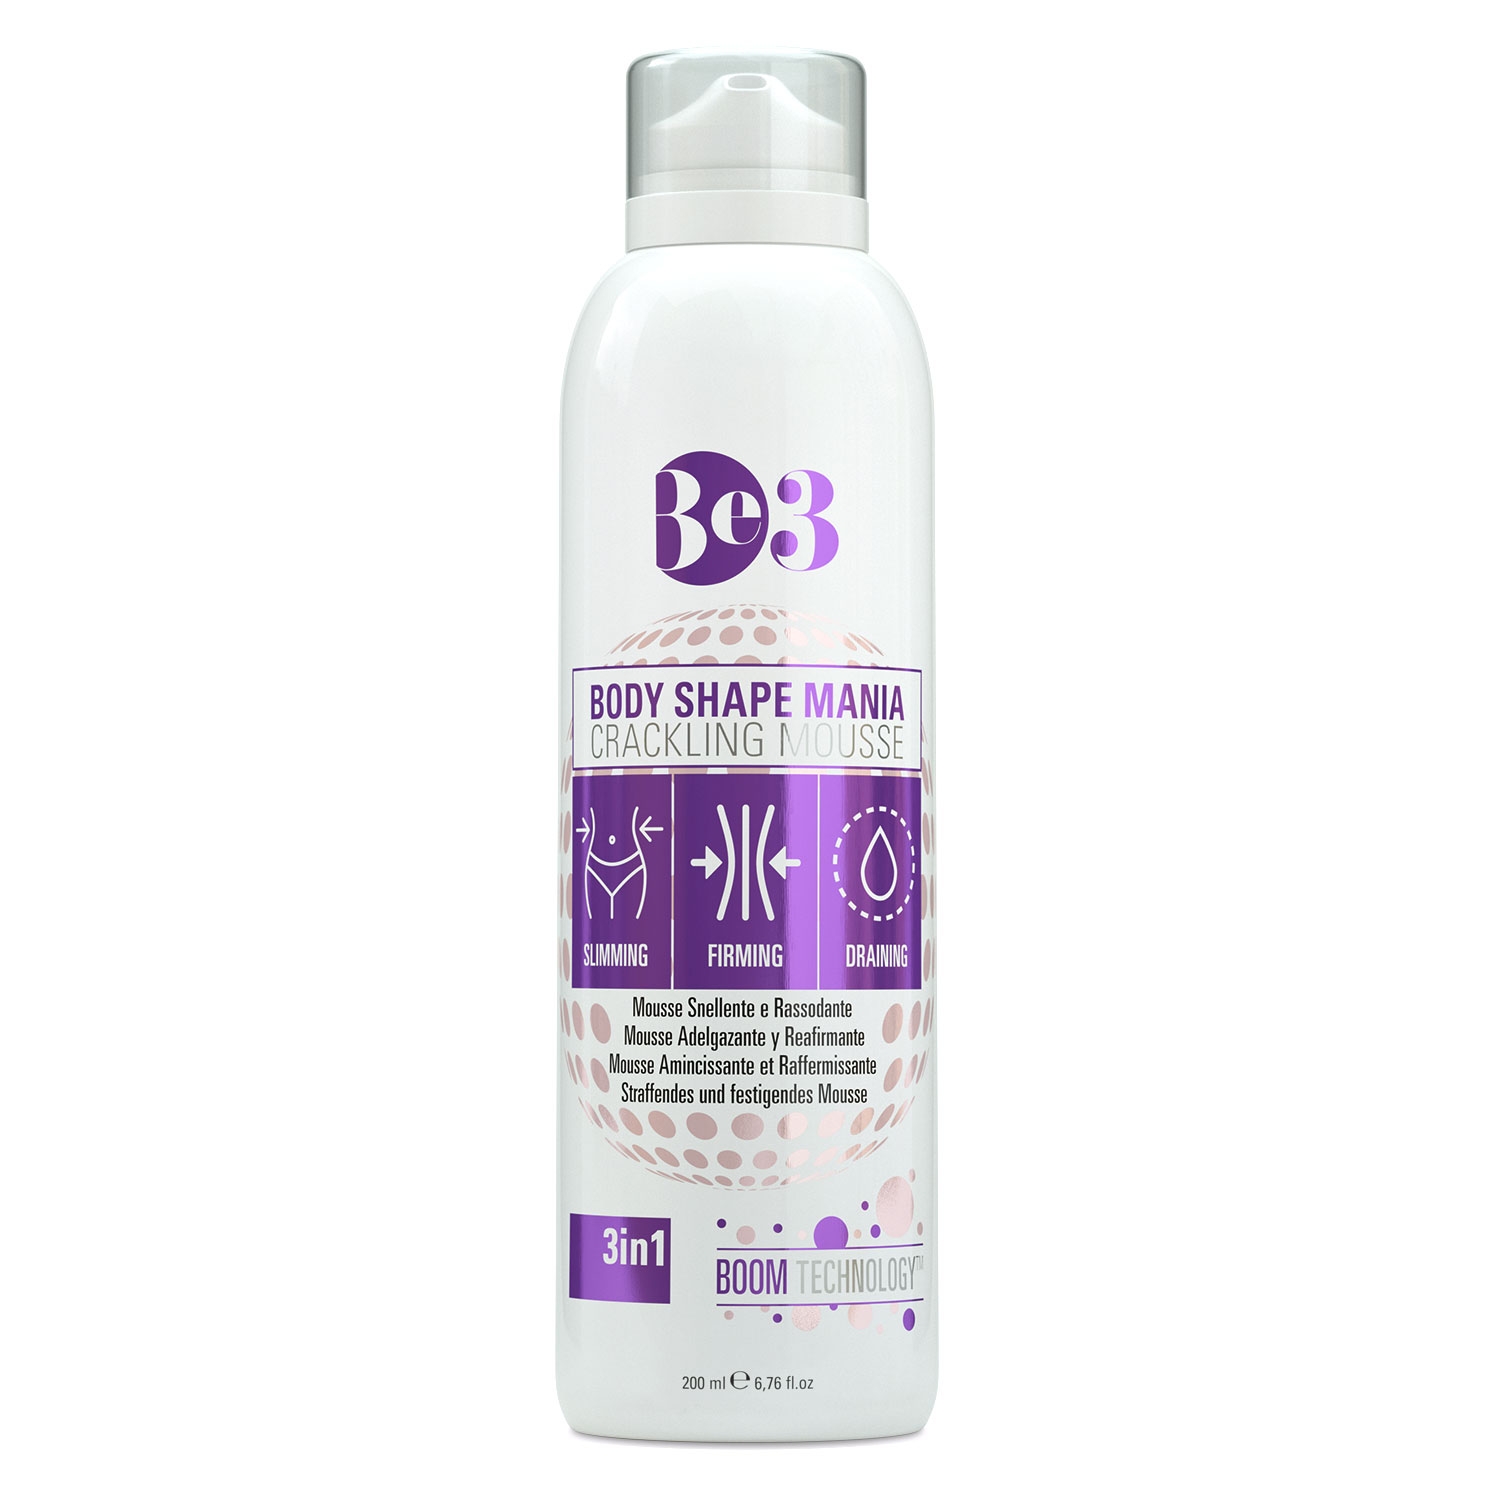 Product image from Mania Skin - Body Shape Mania Crackling Mousse